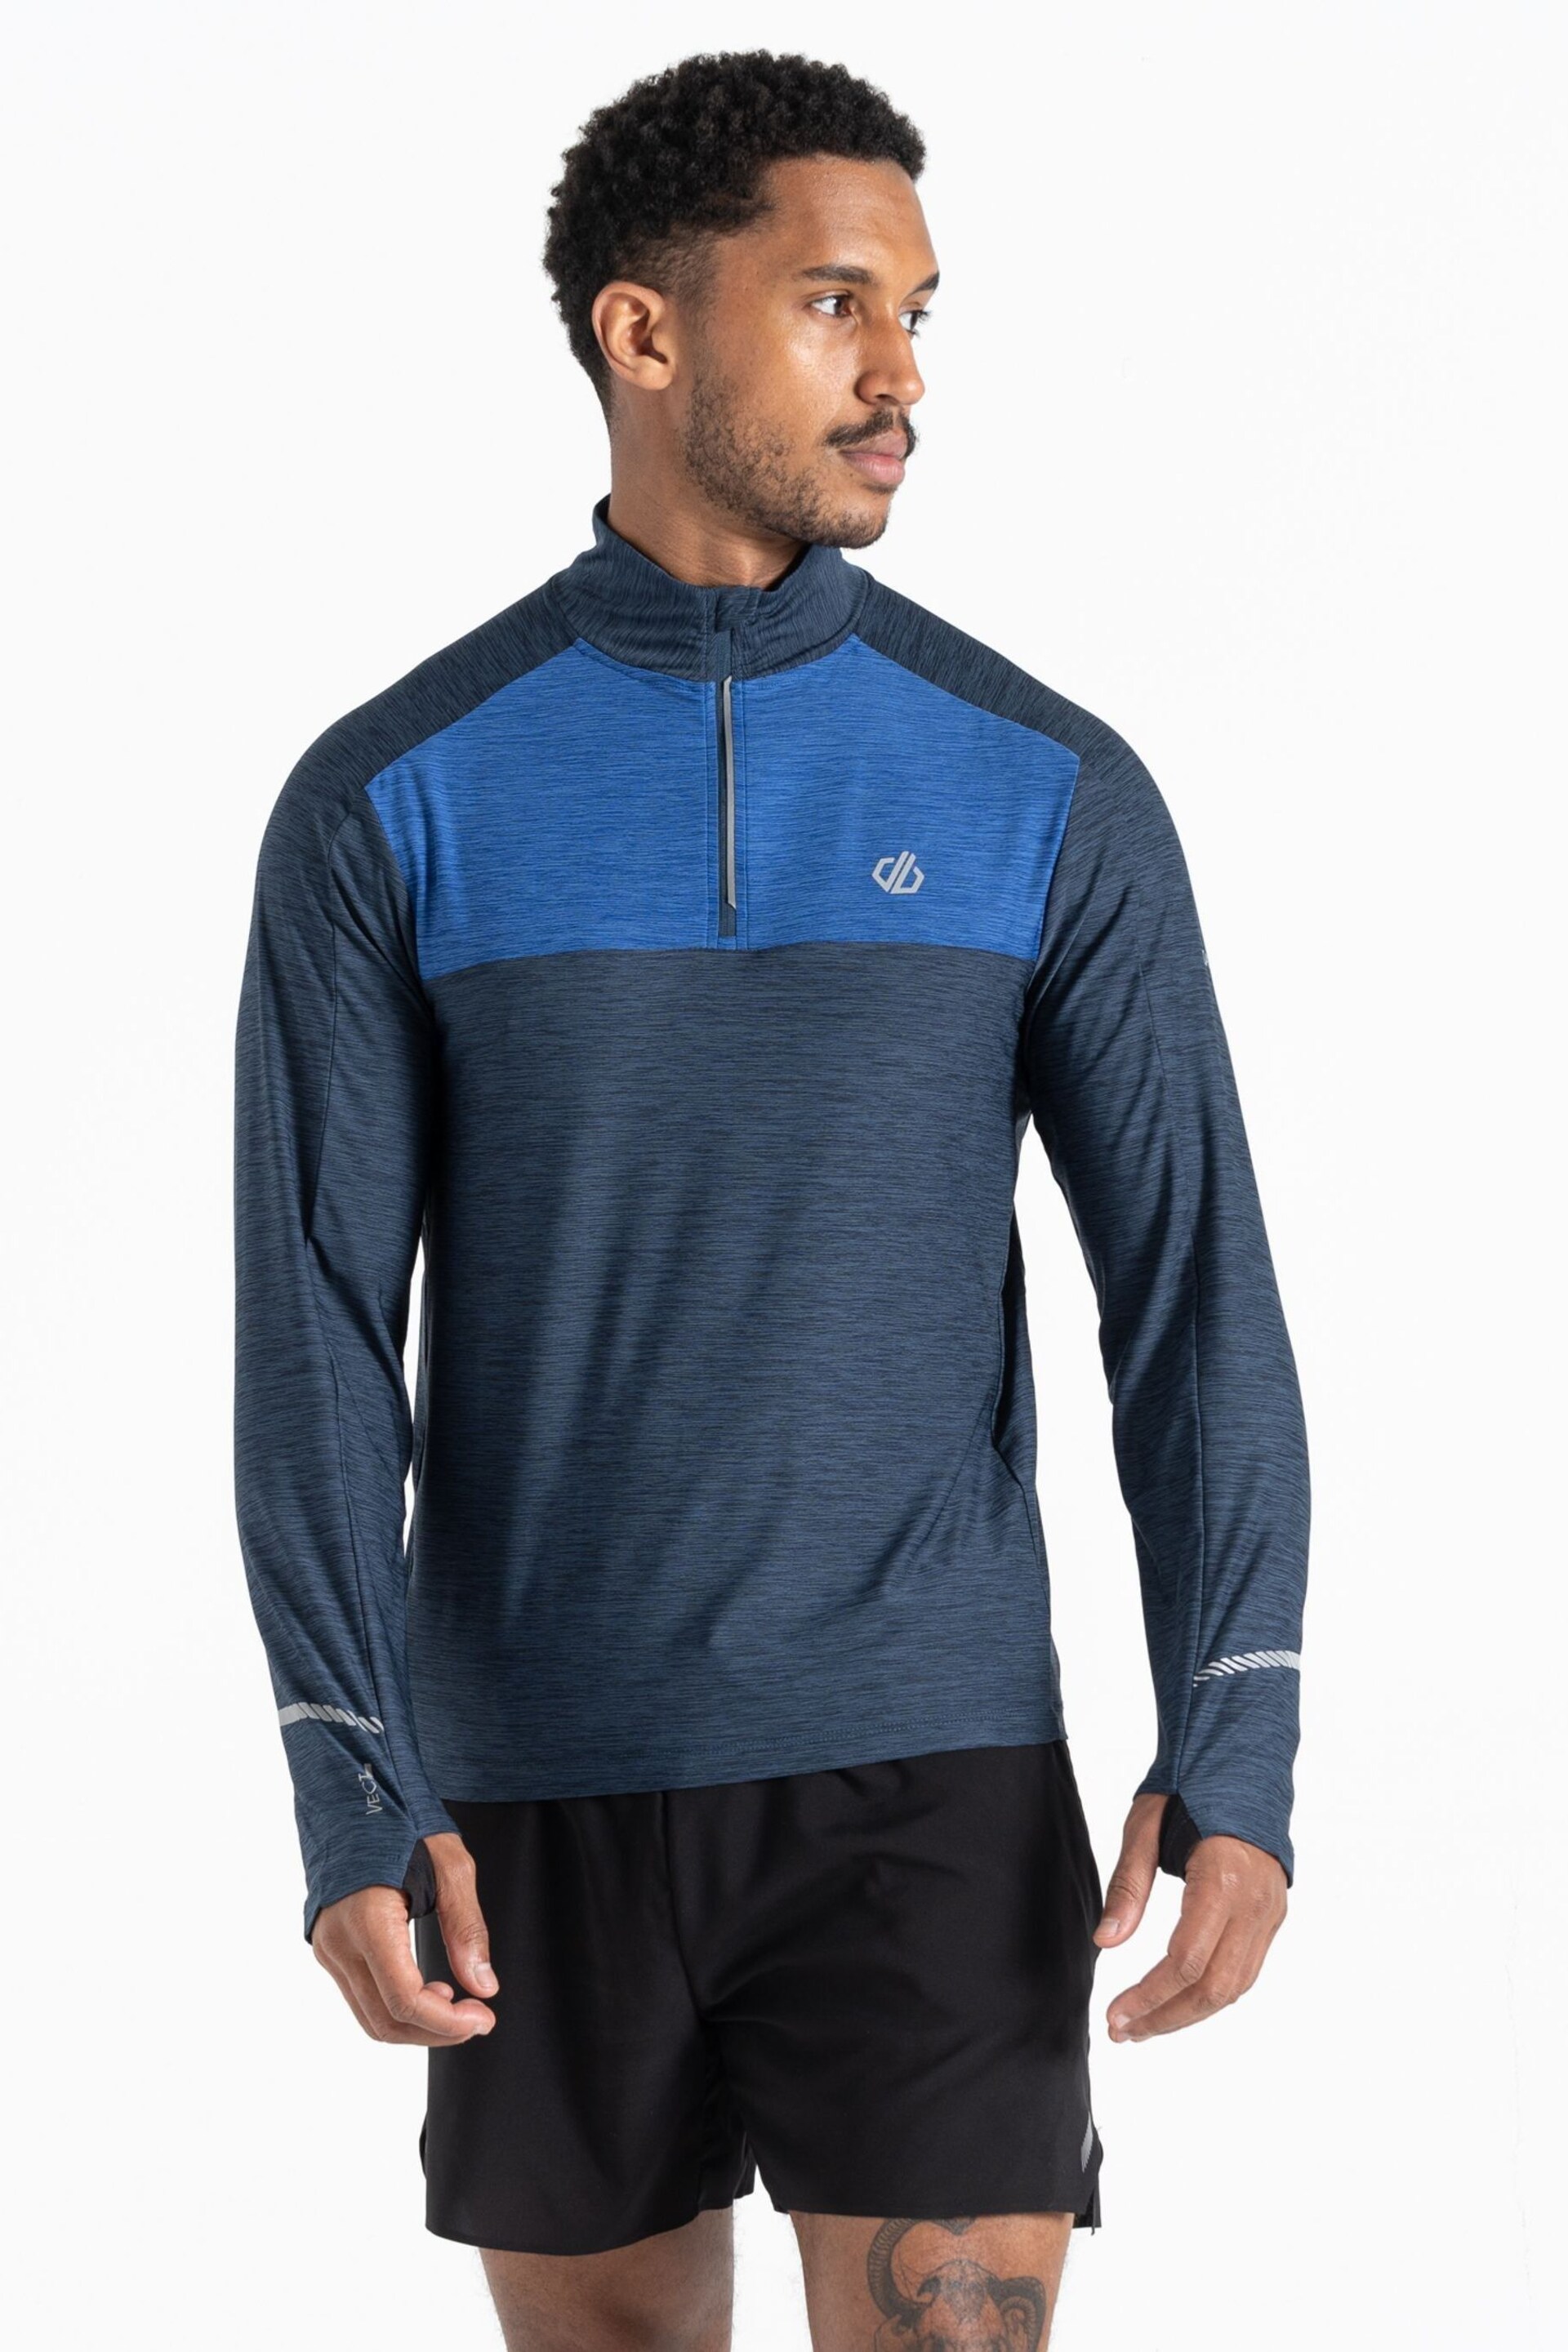 Dare 2b Blue Power Up Long Sleeve Jersey - Image 1 of 6